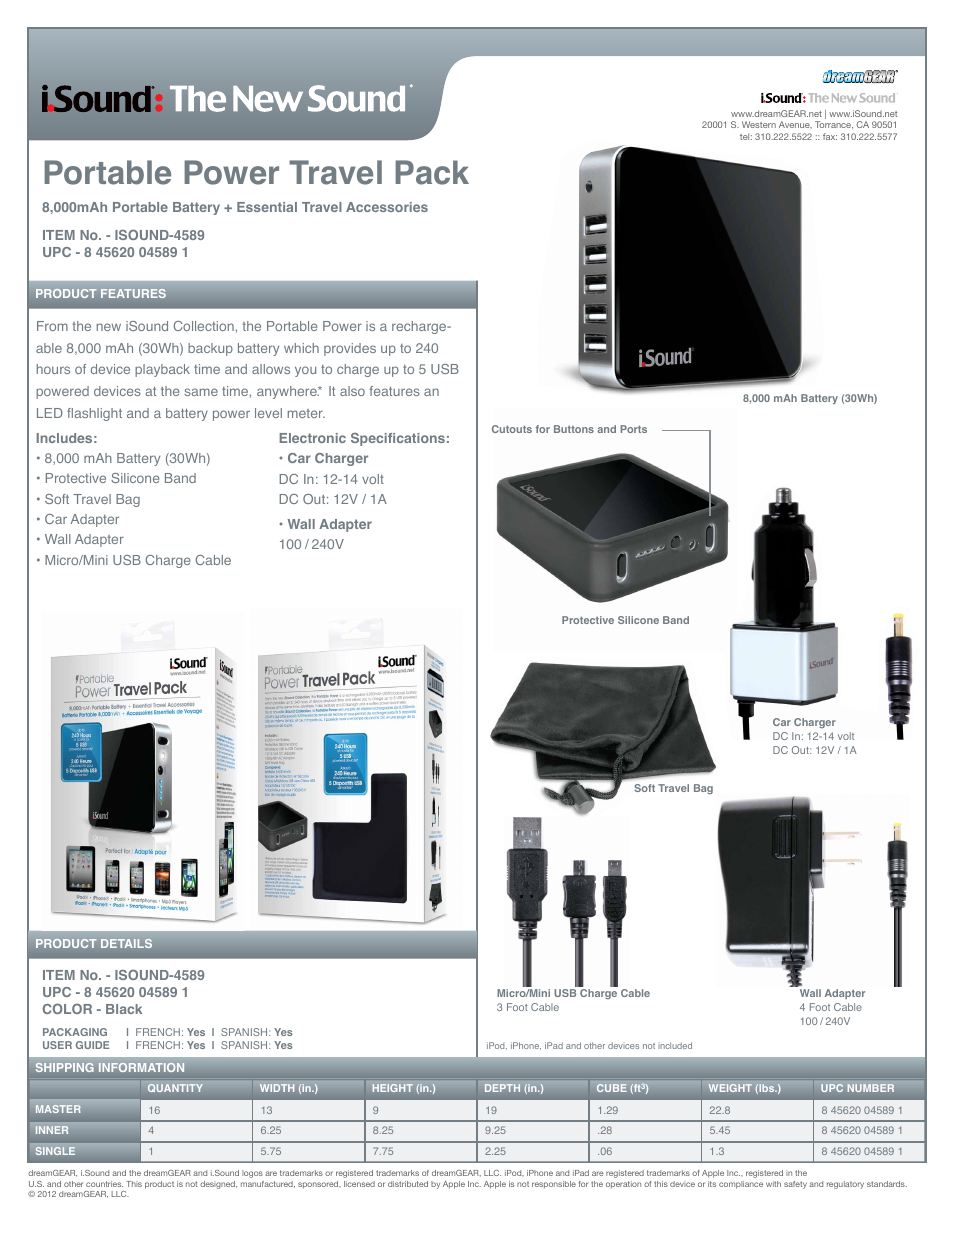 Portable Power Travel Pack - Sell Sheet